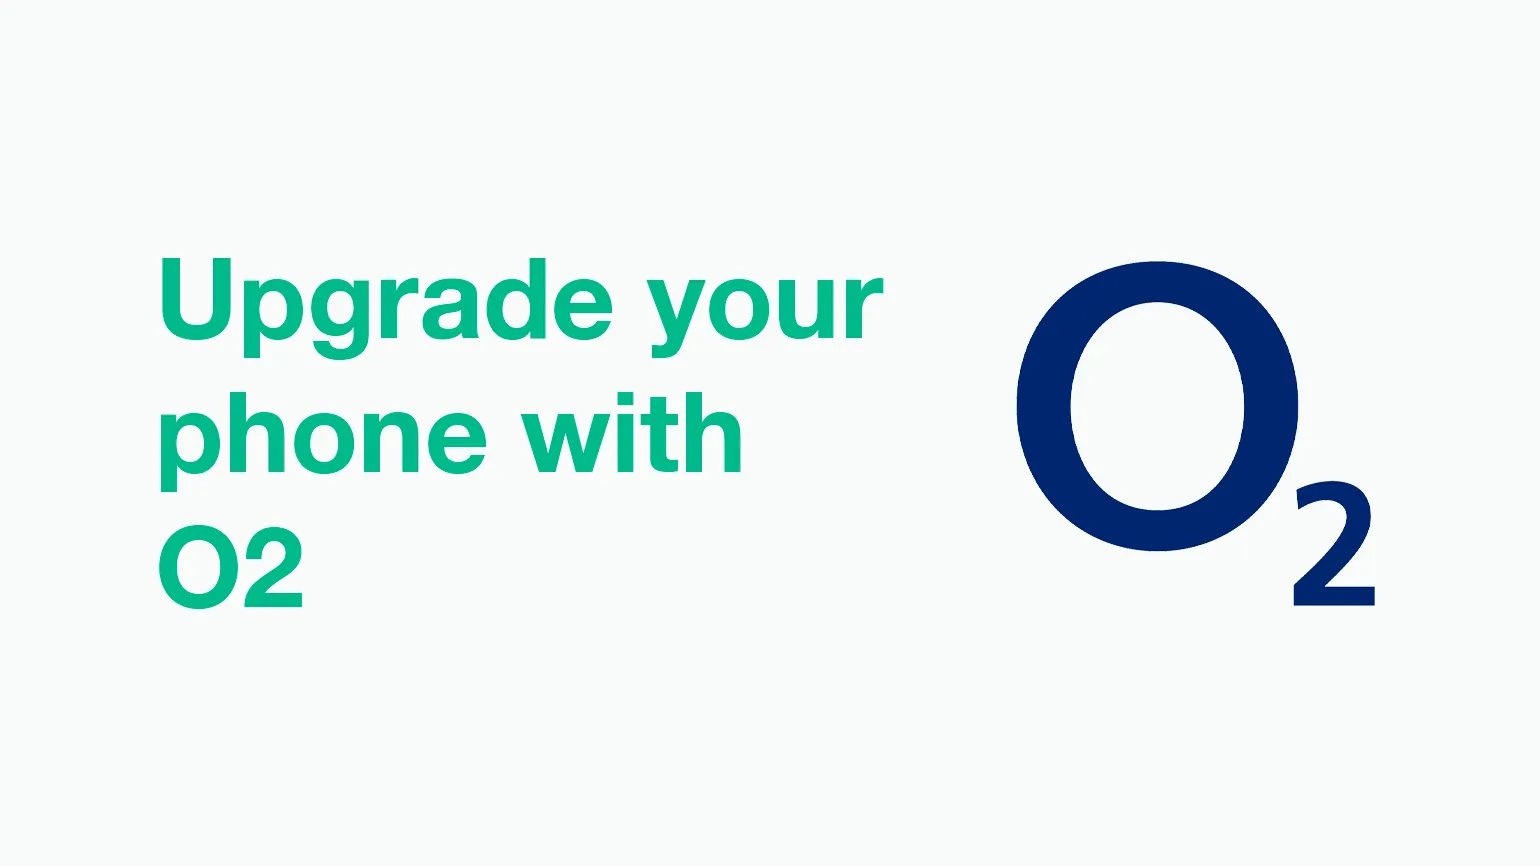 Upgrading your phone on O2